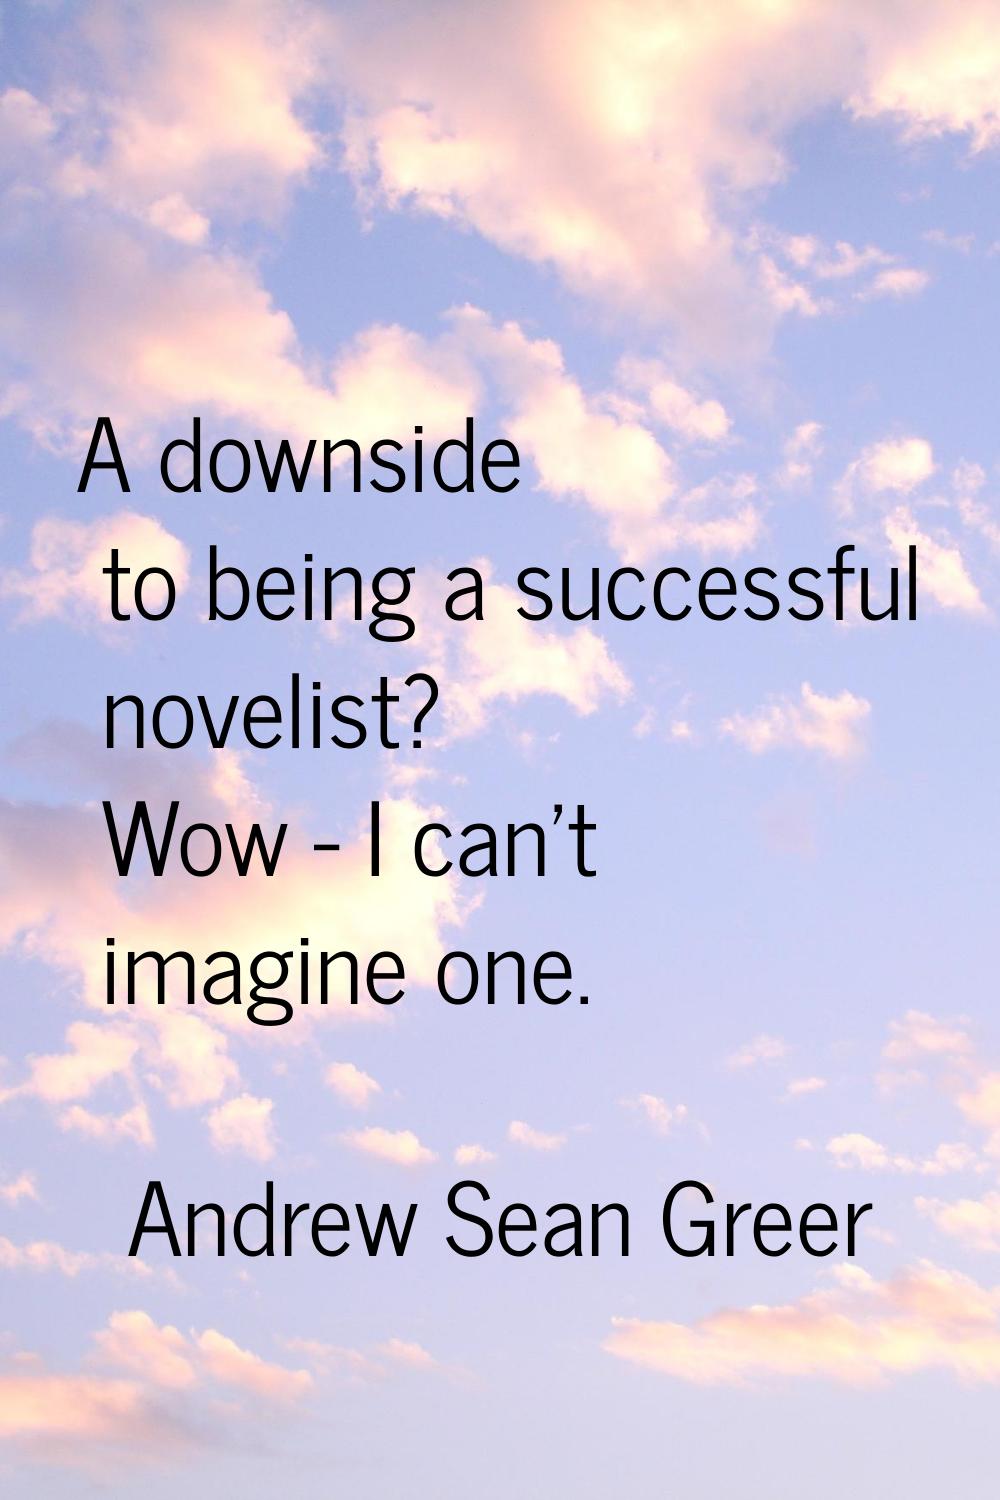 A downside to being a successful novelist? Wow - I can't imagine one.